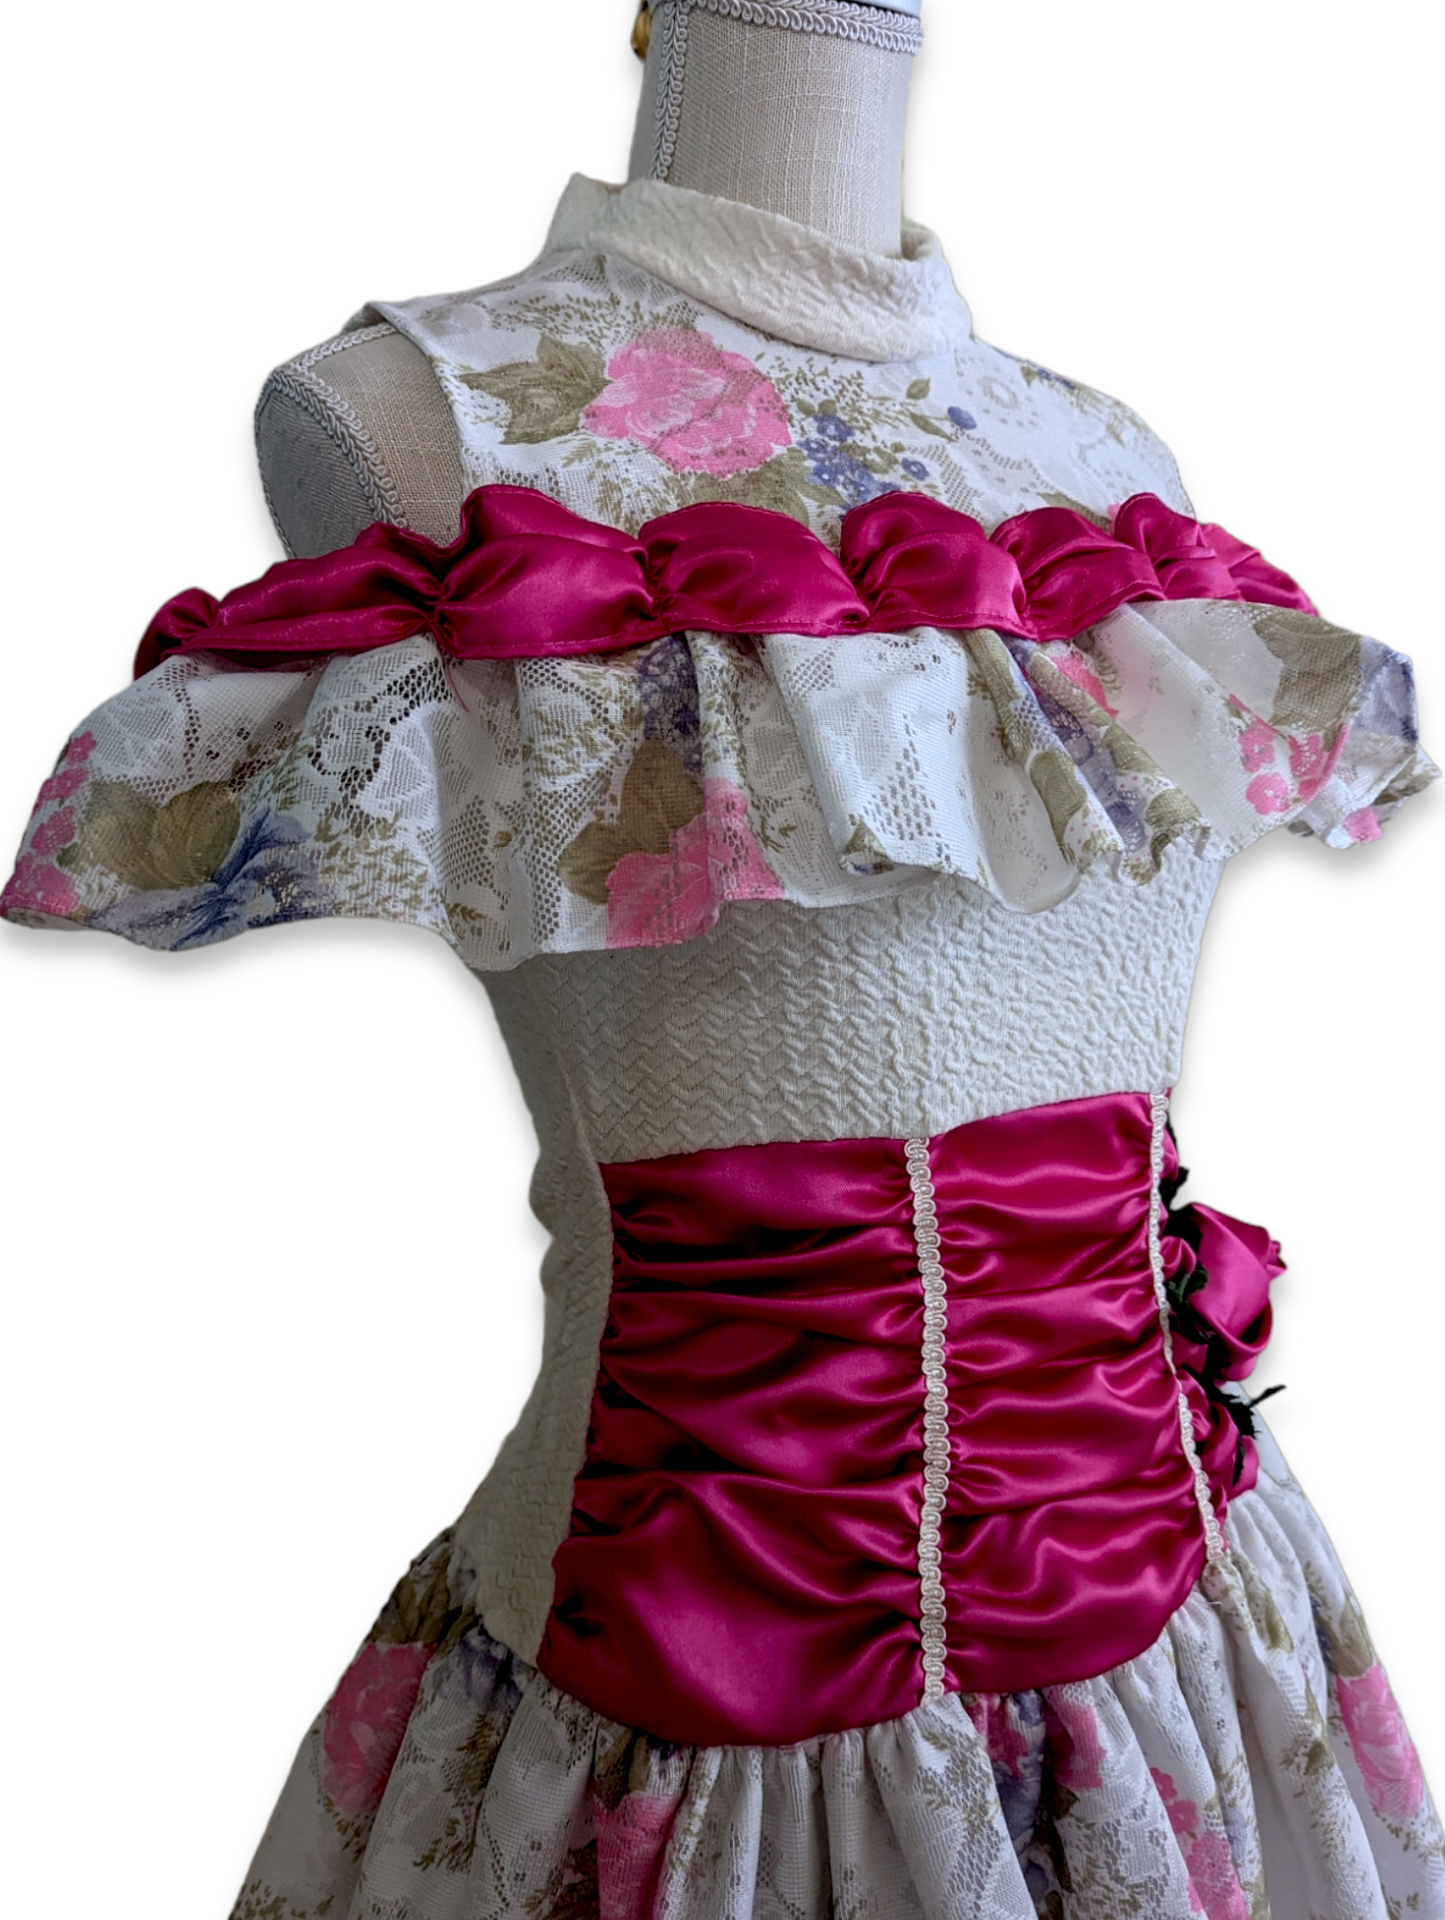 1980s Lipstick Pink Dress with Drop Waist, Pink Roses, Satin Ruching,  Lace and Off the Shoulder Peekaboo Ruffle Sleeves